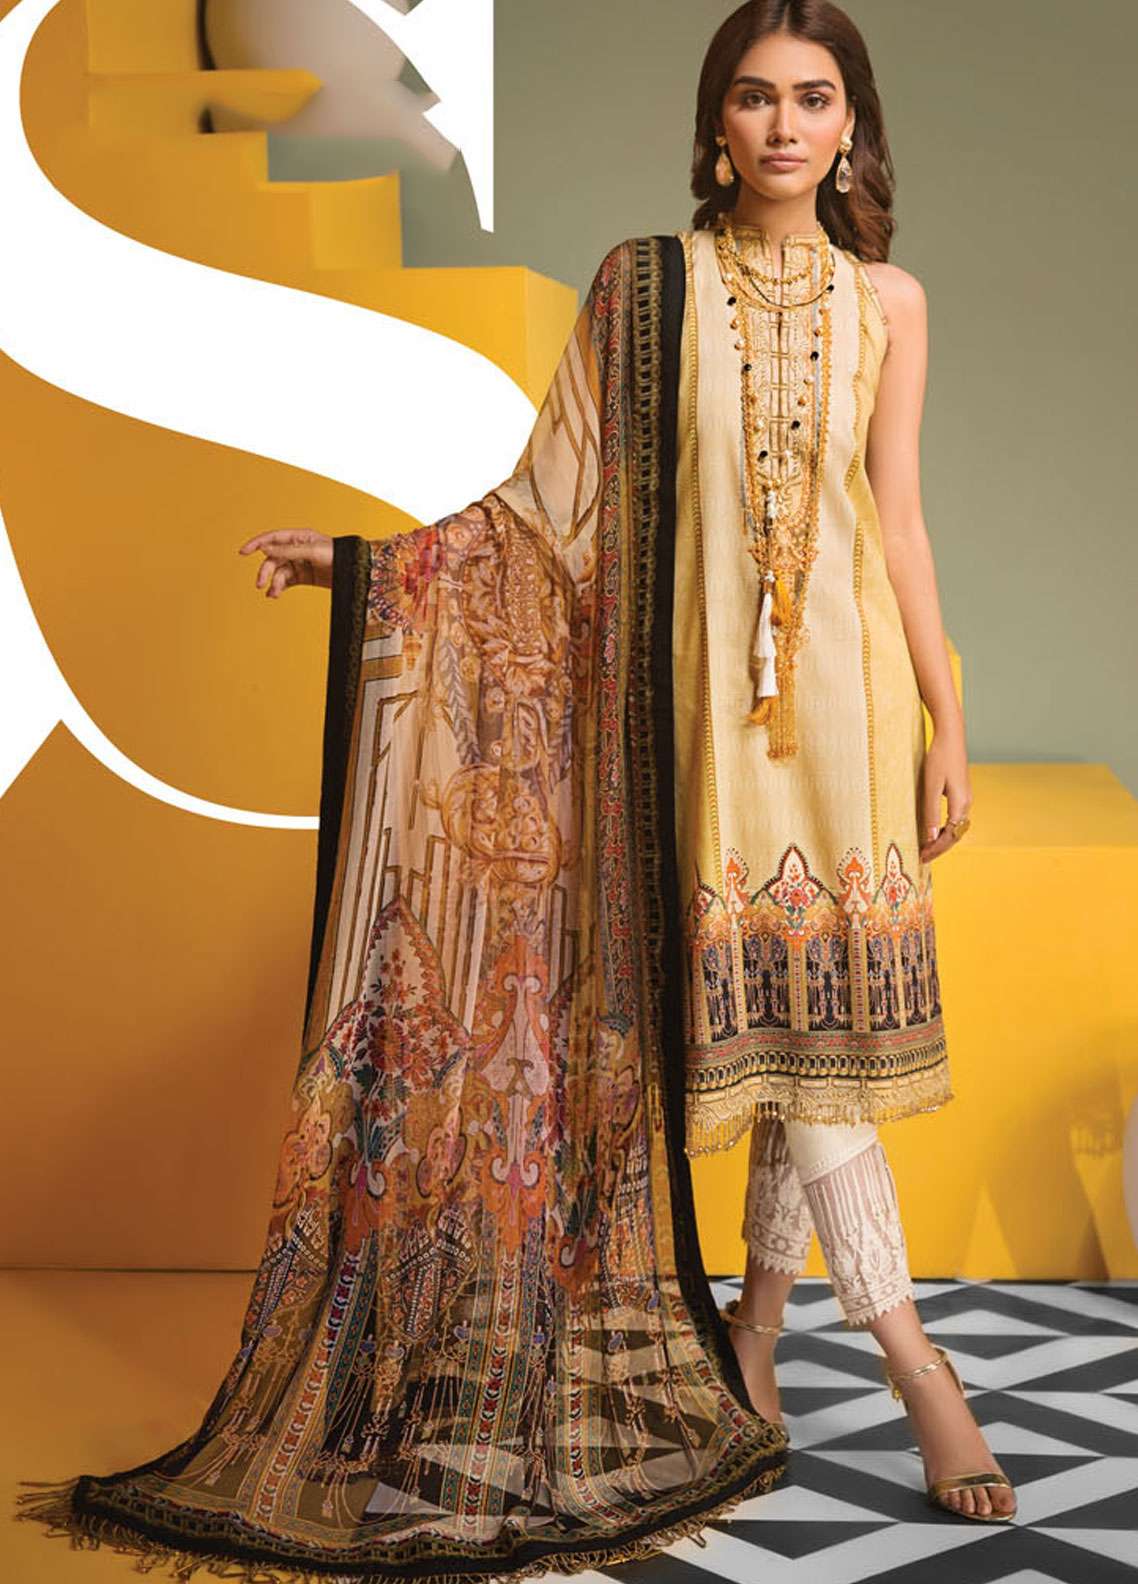 Viva Anaya By Kiran Chaudhry Embroidered Lawn Unstitched 3 Piece Suit VL19-09 SOPHIA